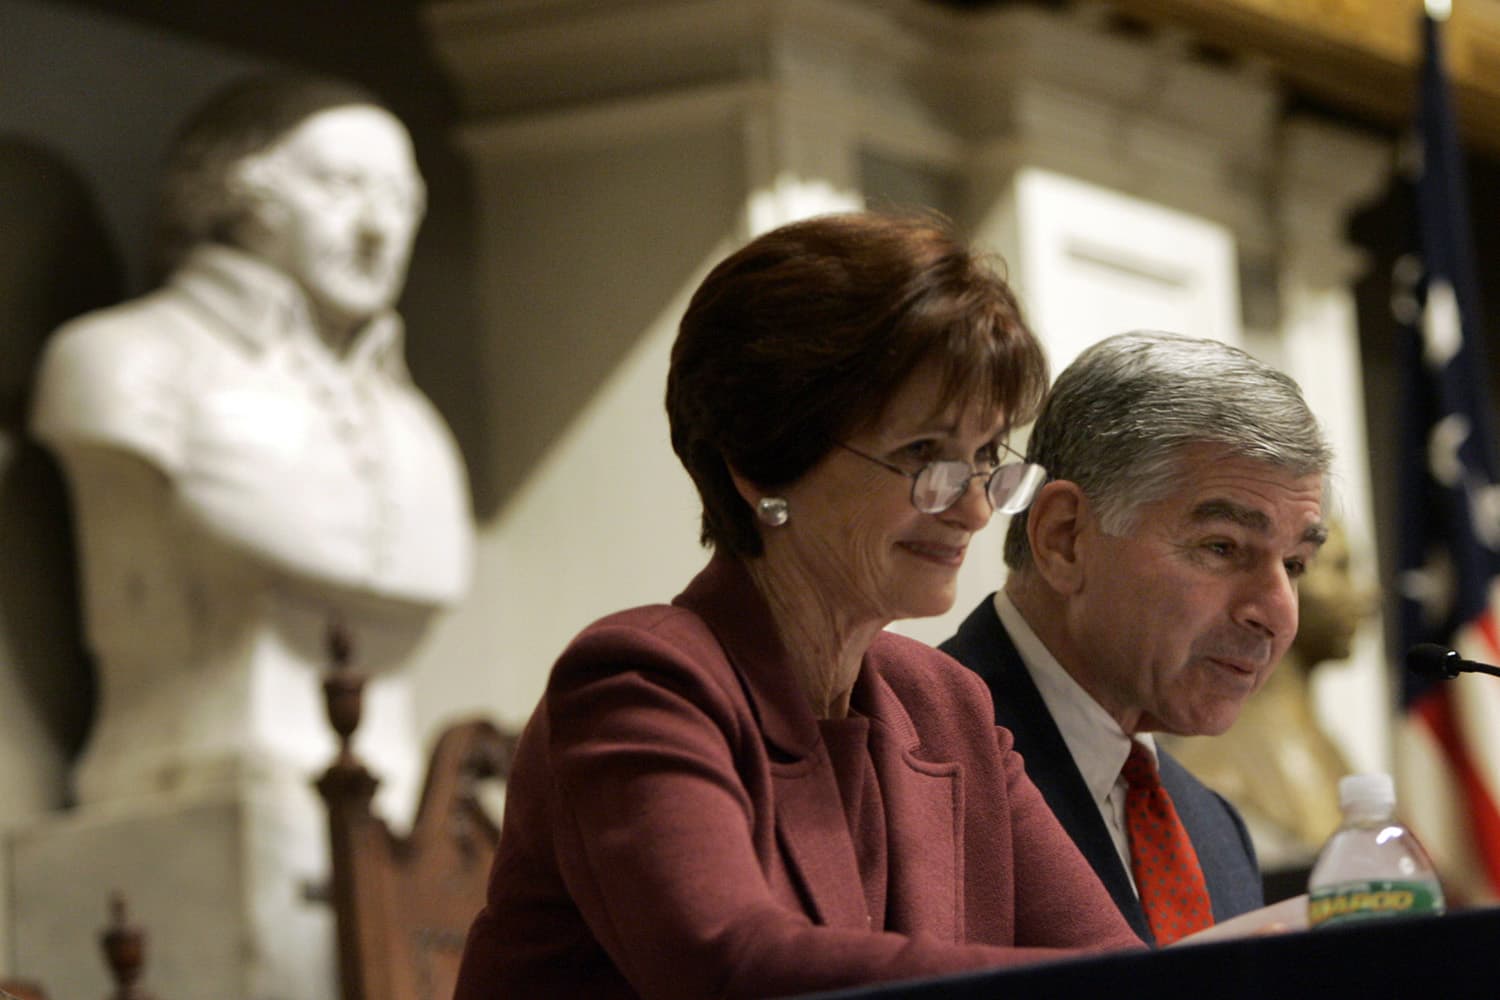 Former Massachusetts Gov. Michael Dukakis and his wife, Kitty, smile as they read letters between John Adams and his wife, Abigail, during a Massachusetts Historical Society program at Faneuil Hall in Boston. (Elise Amendola/AP)